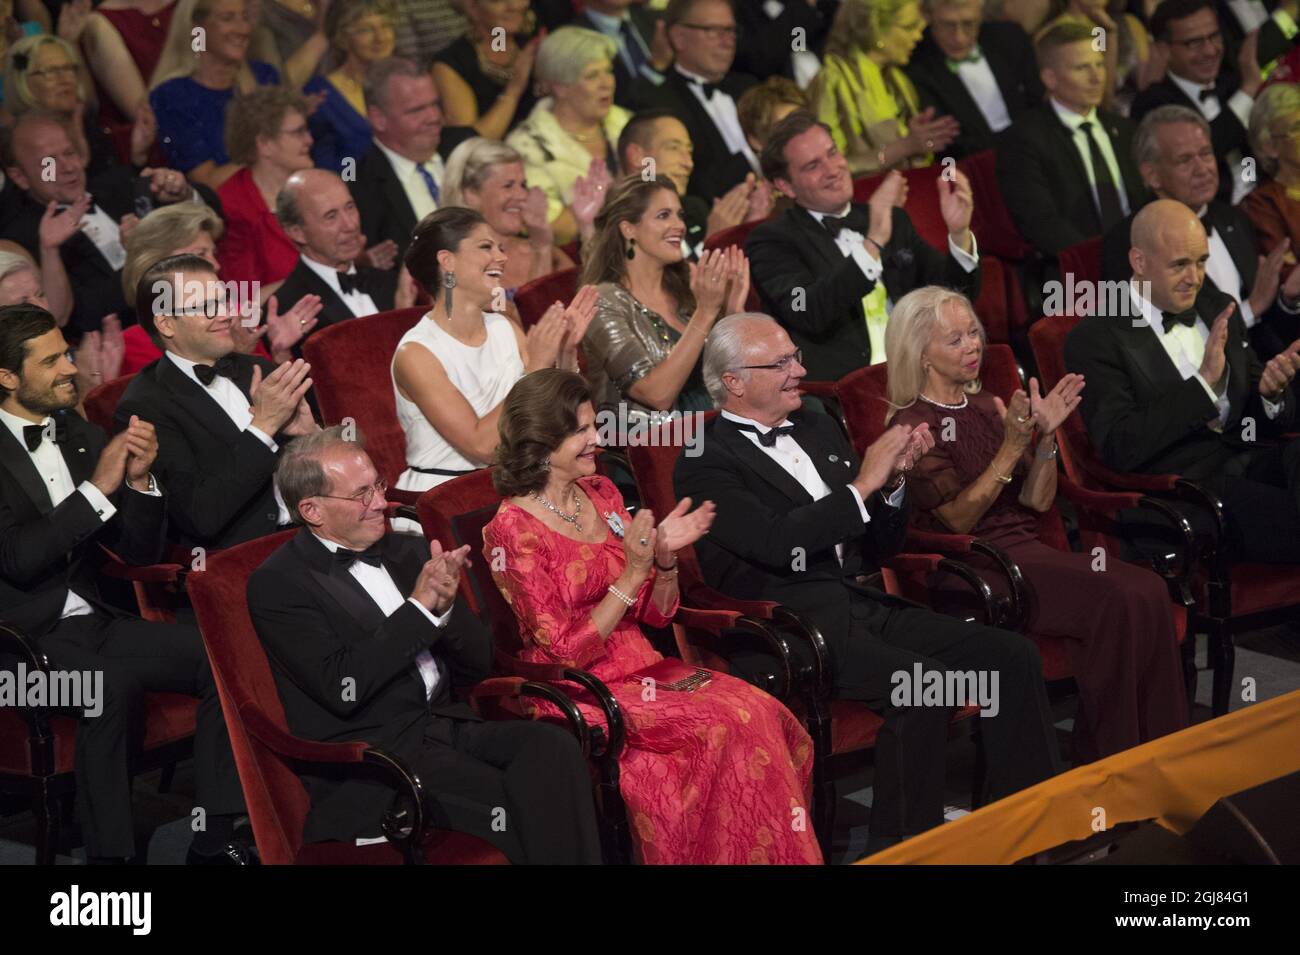 STOCKHOLM 20130914 Prince Carl Philip, Prince Daniel, Crown Princess Victoria, Princess Madeleine, Mr Christopher O'Neill and in front of them Queen Silvia and King Carl Gustaf between Per Westerberg, the speaker of the PArliament and his wife Ylwa Westerberg at the Swedish Riksdag's jubilee concert in connection with The King's 40th jubilee, held at the Concert Hall in Stockholm September 14, 2013. Photo: Fredrik Sandberg / SCANPIX / Kod 10080  Stock Photo